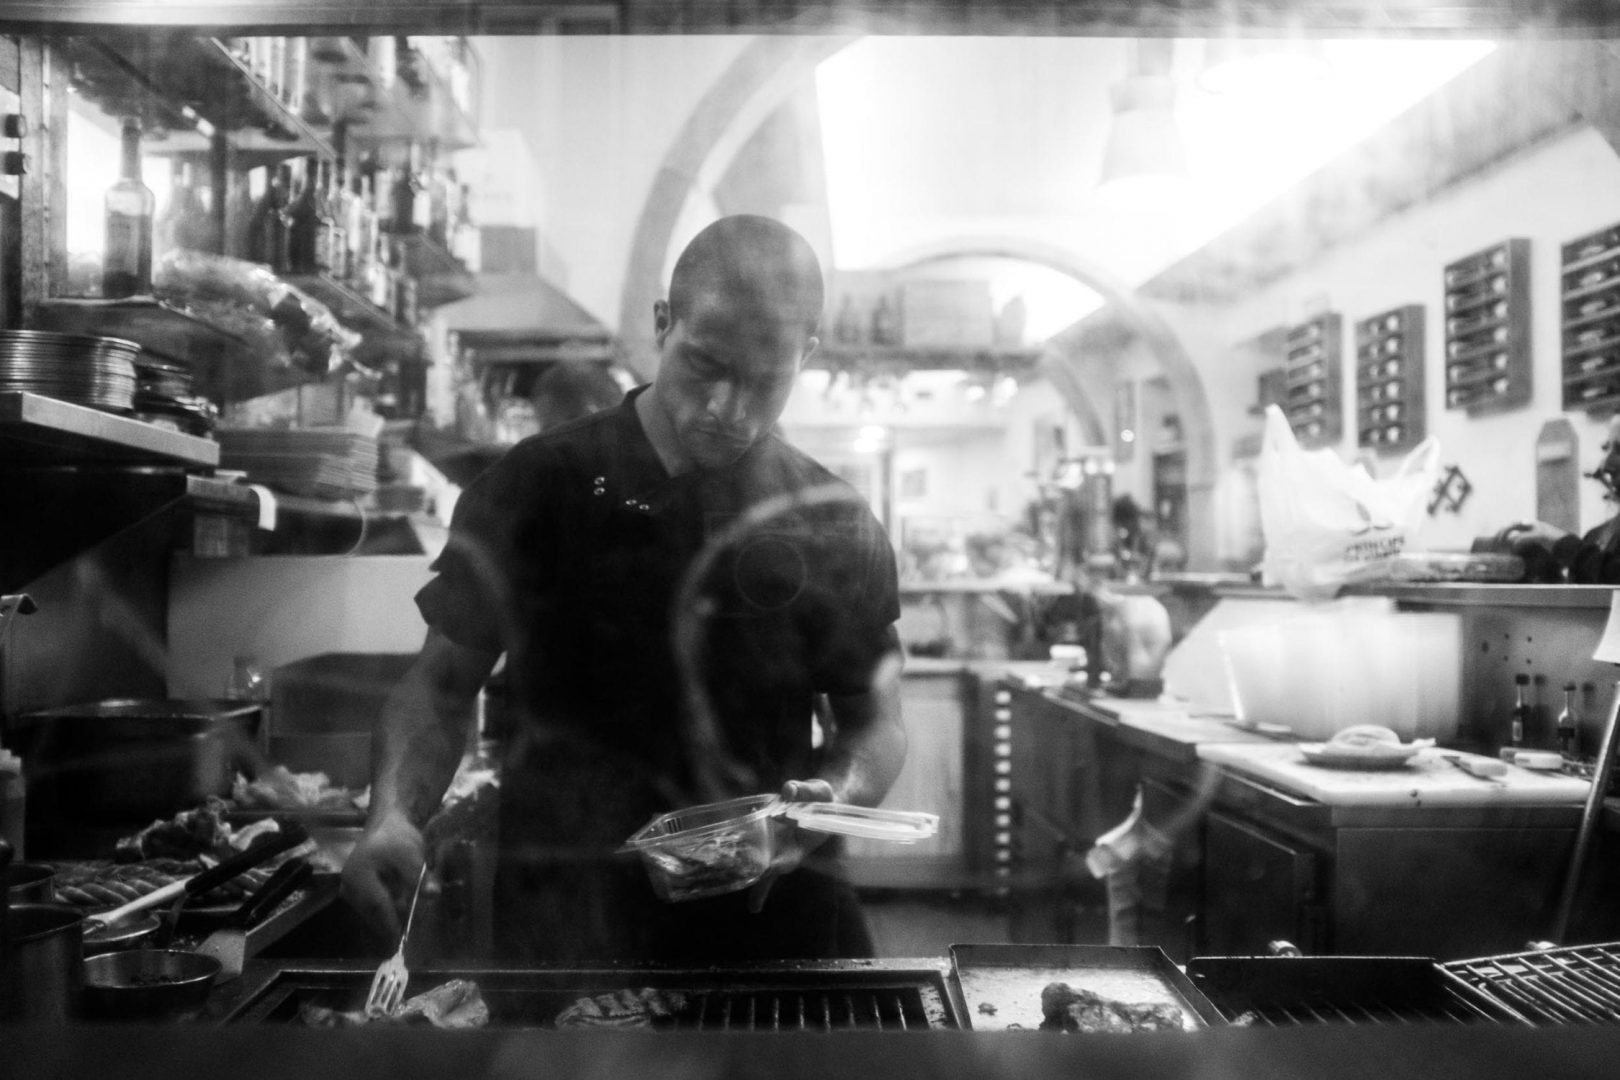 Window shot of a restaurant. The Fujifilm X100F is so discreet that this guy didn't even spot that I was taking him a picture. 